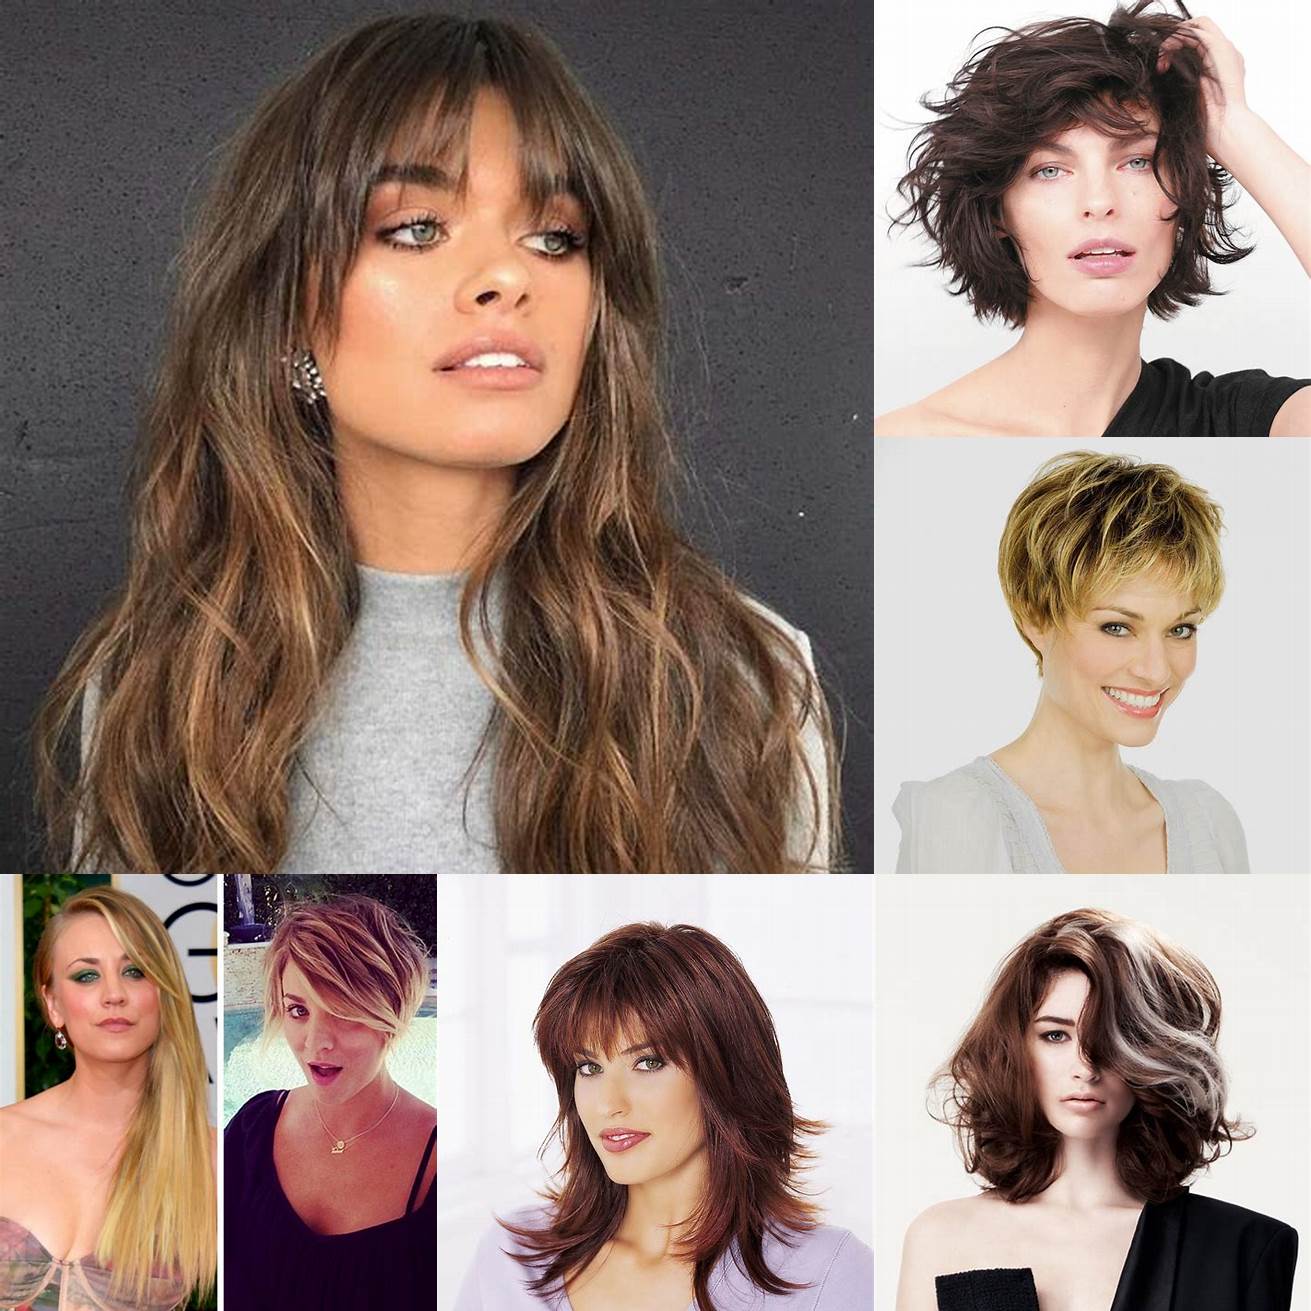 Haircuts Whether youre looking for a trim or a dramatic change M Et V Coiffure can help you achieve your desired look